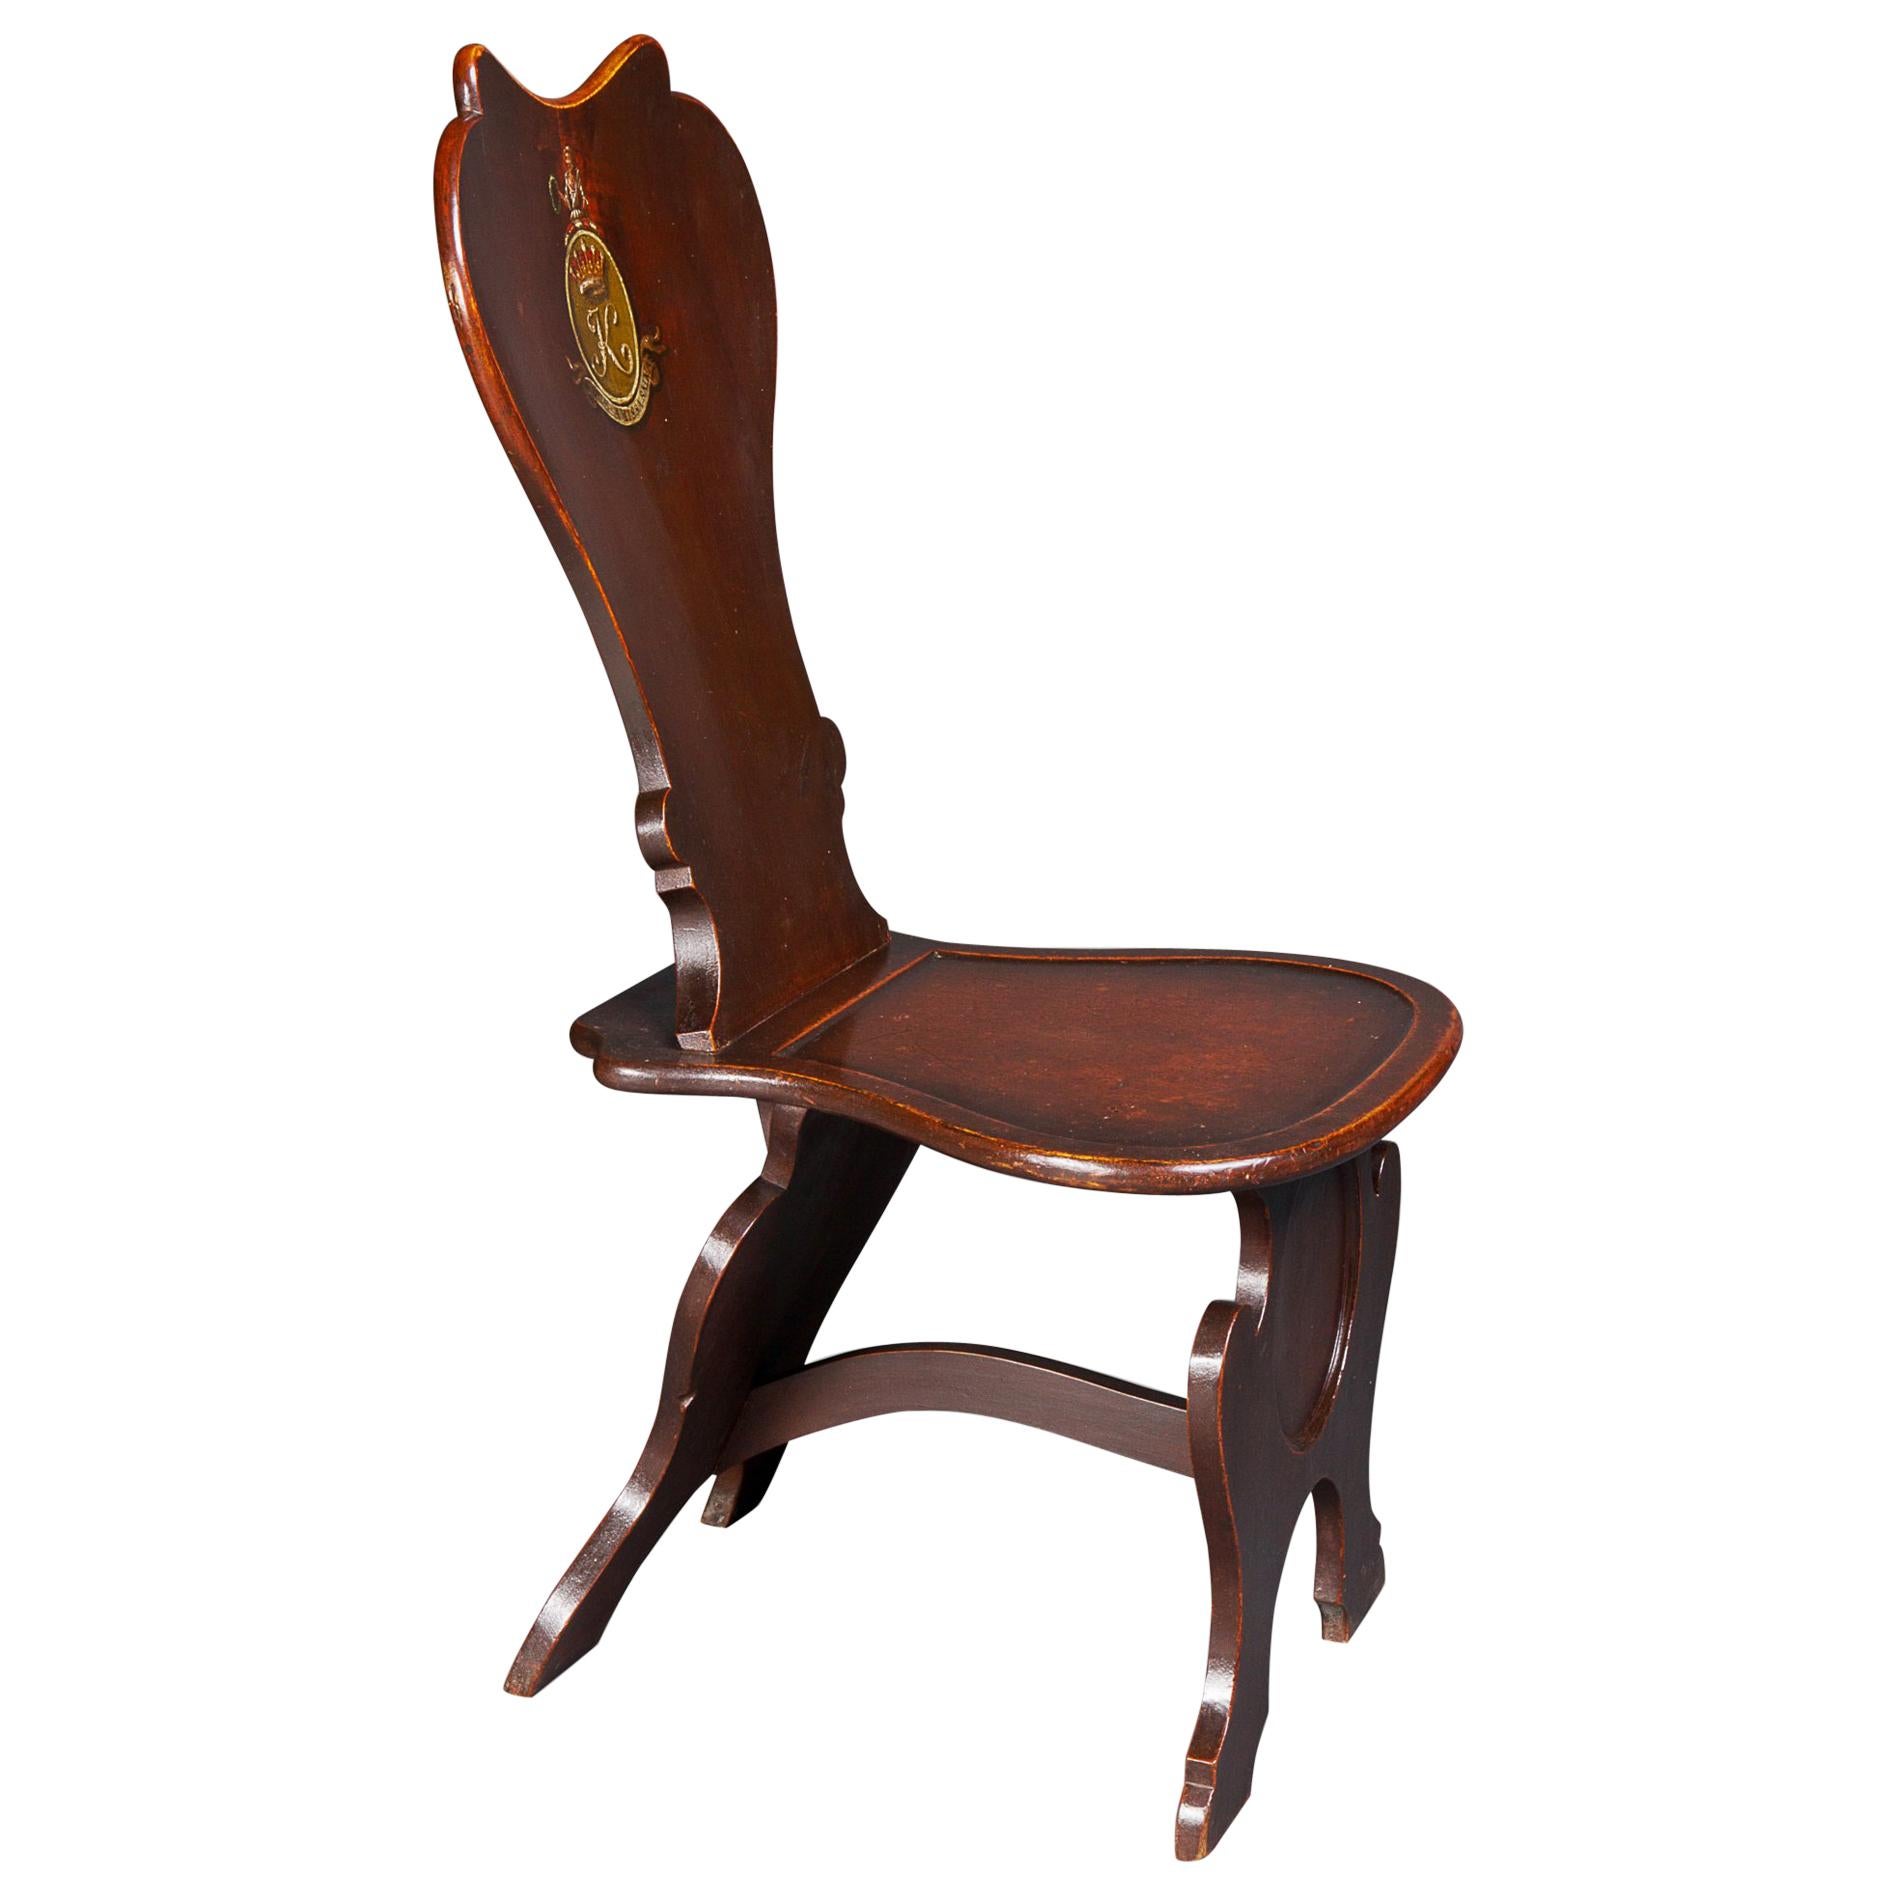 Very Fine George II Mahogany Spoon-Back Hall Chair for the Earls of Kintore For Sale